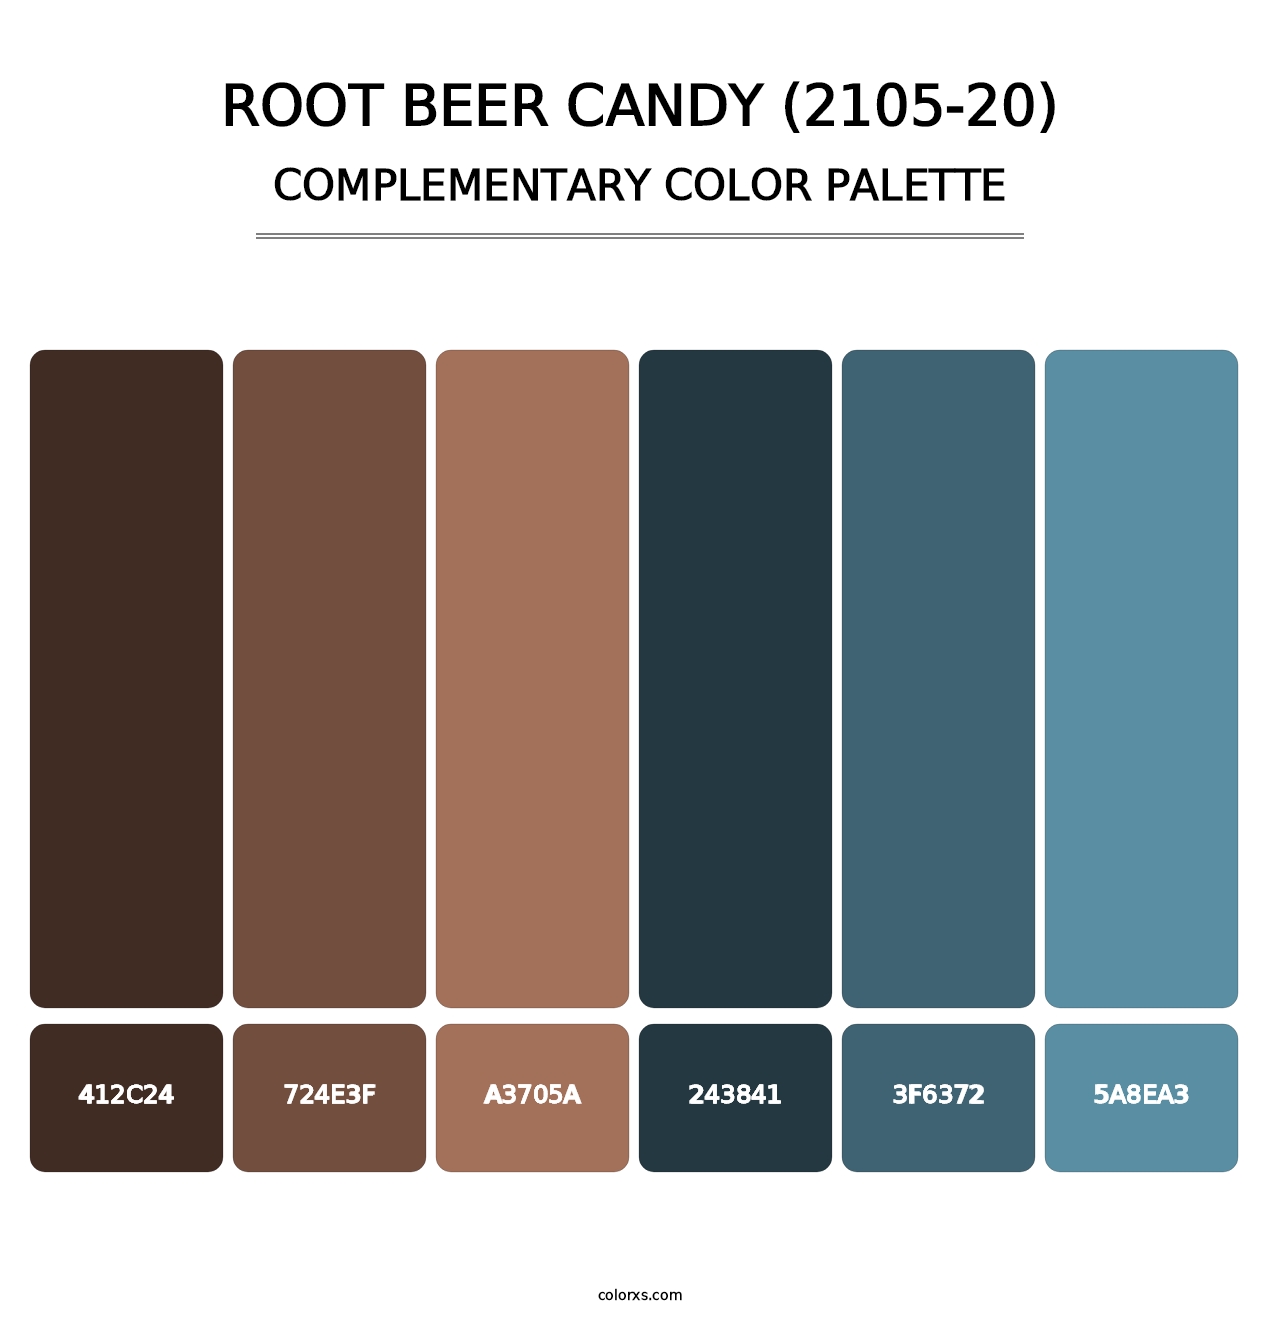 Root Beer Candy (2105-20) - Complementary Color Palette